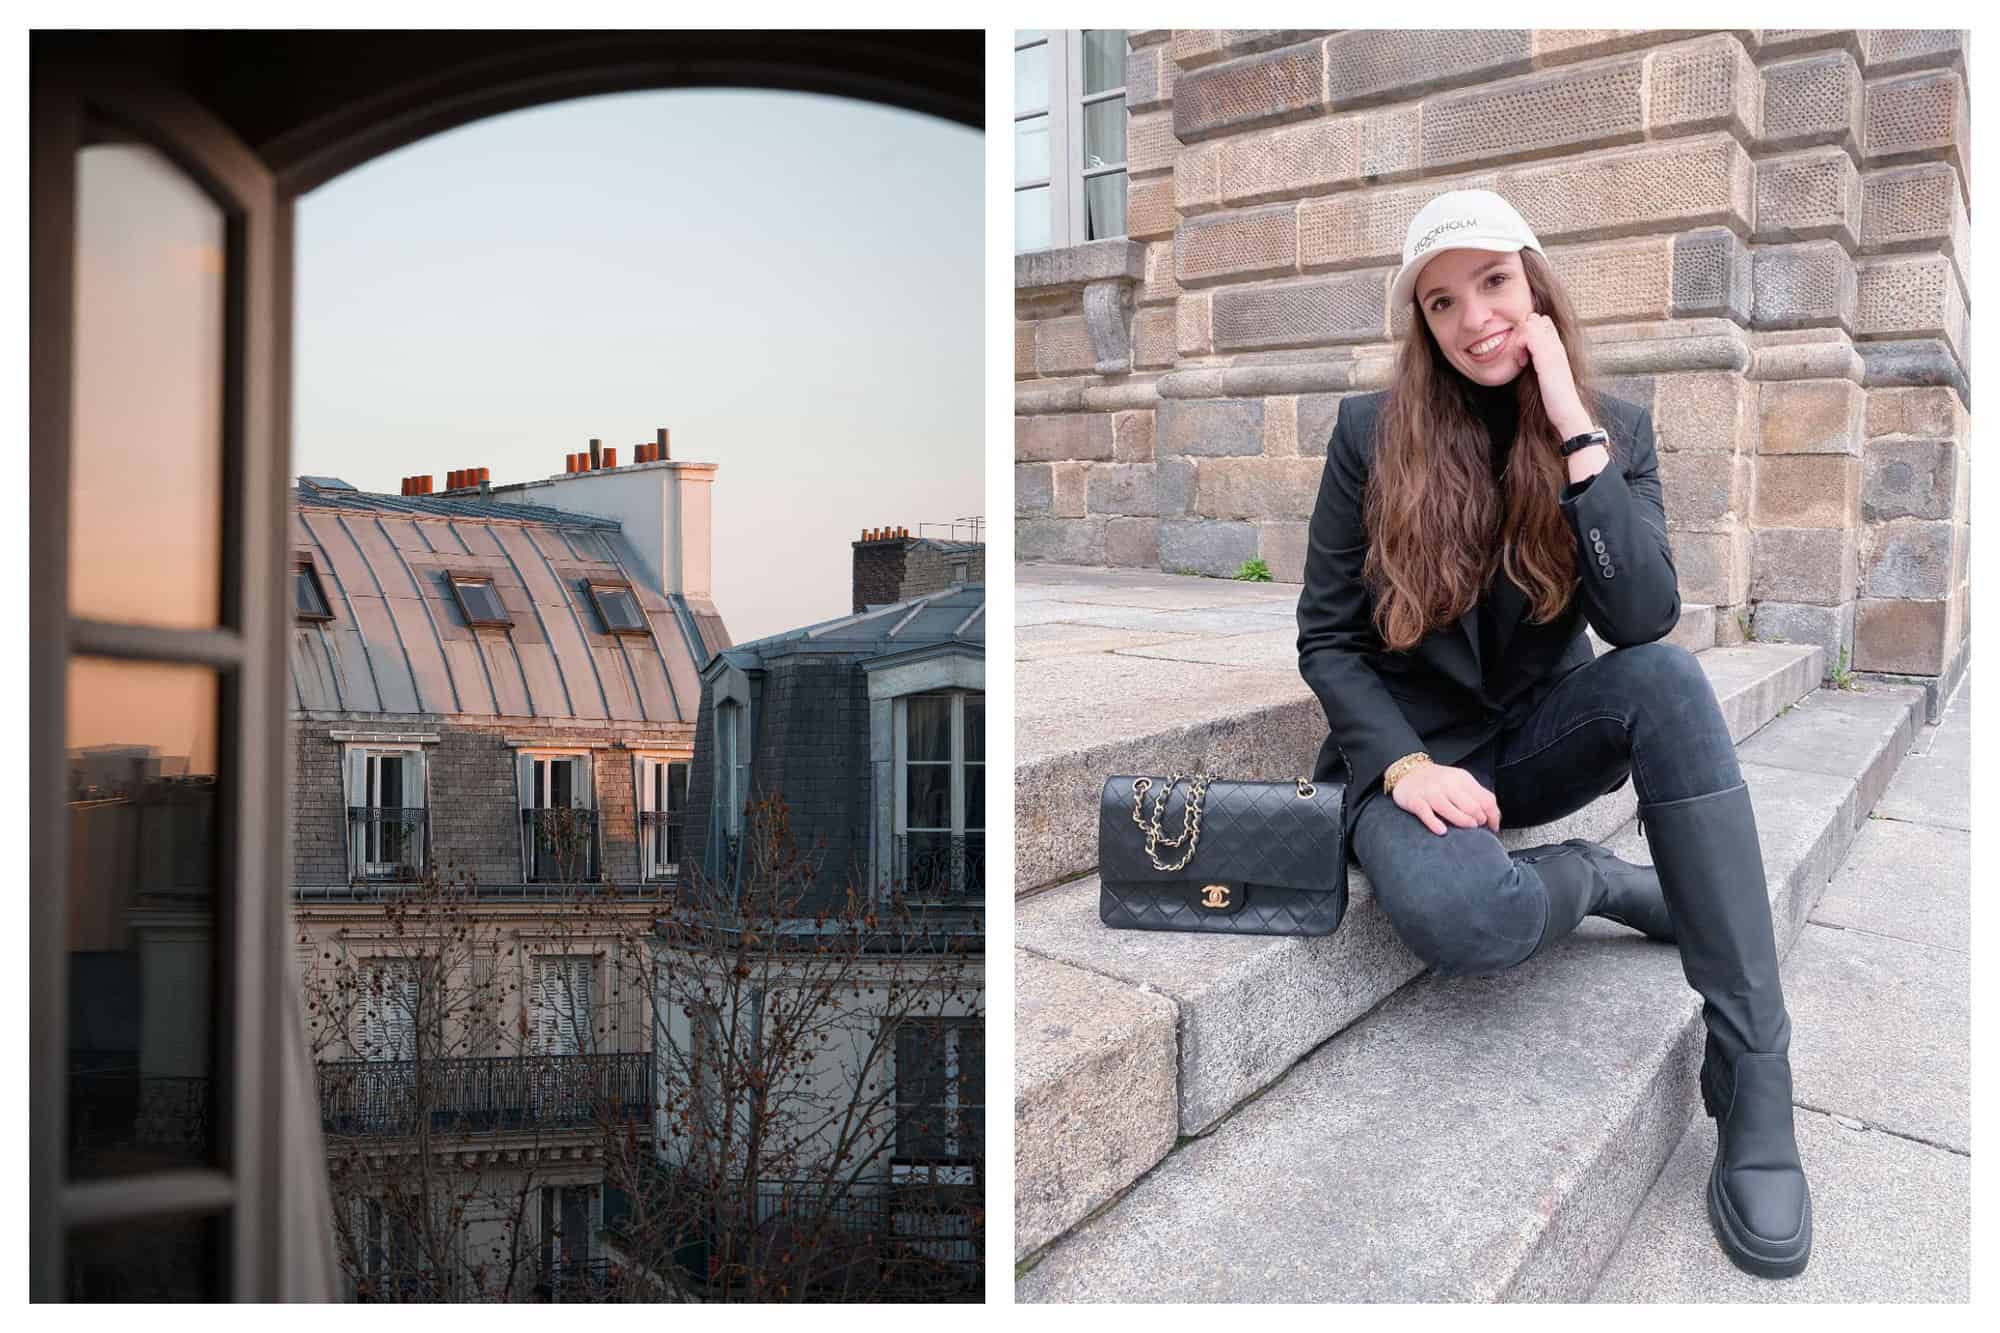 Left- Roof tops are shown through an open window in Paris. 
Right- A young woman sits on steps wearing black jeans, a black blazer, and a white baseball cap. She sits next to a Chanel bag. 
